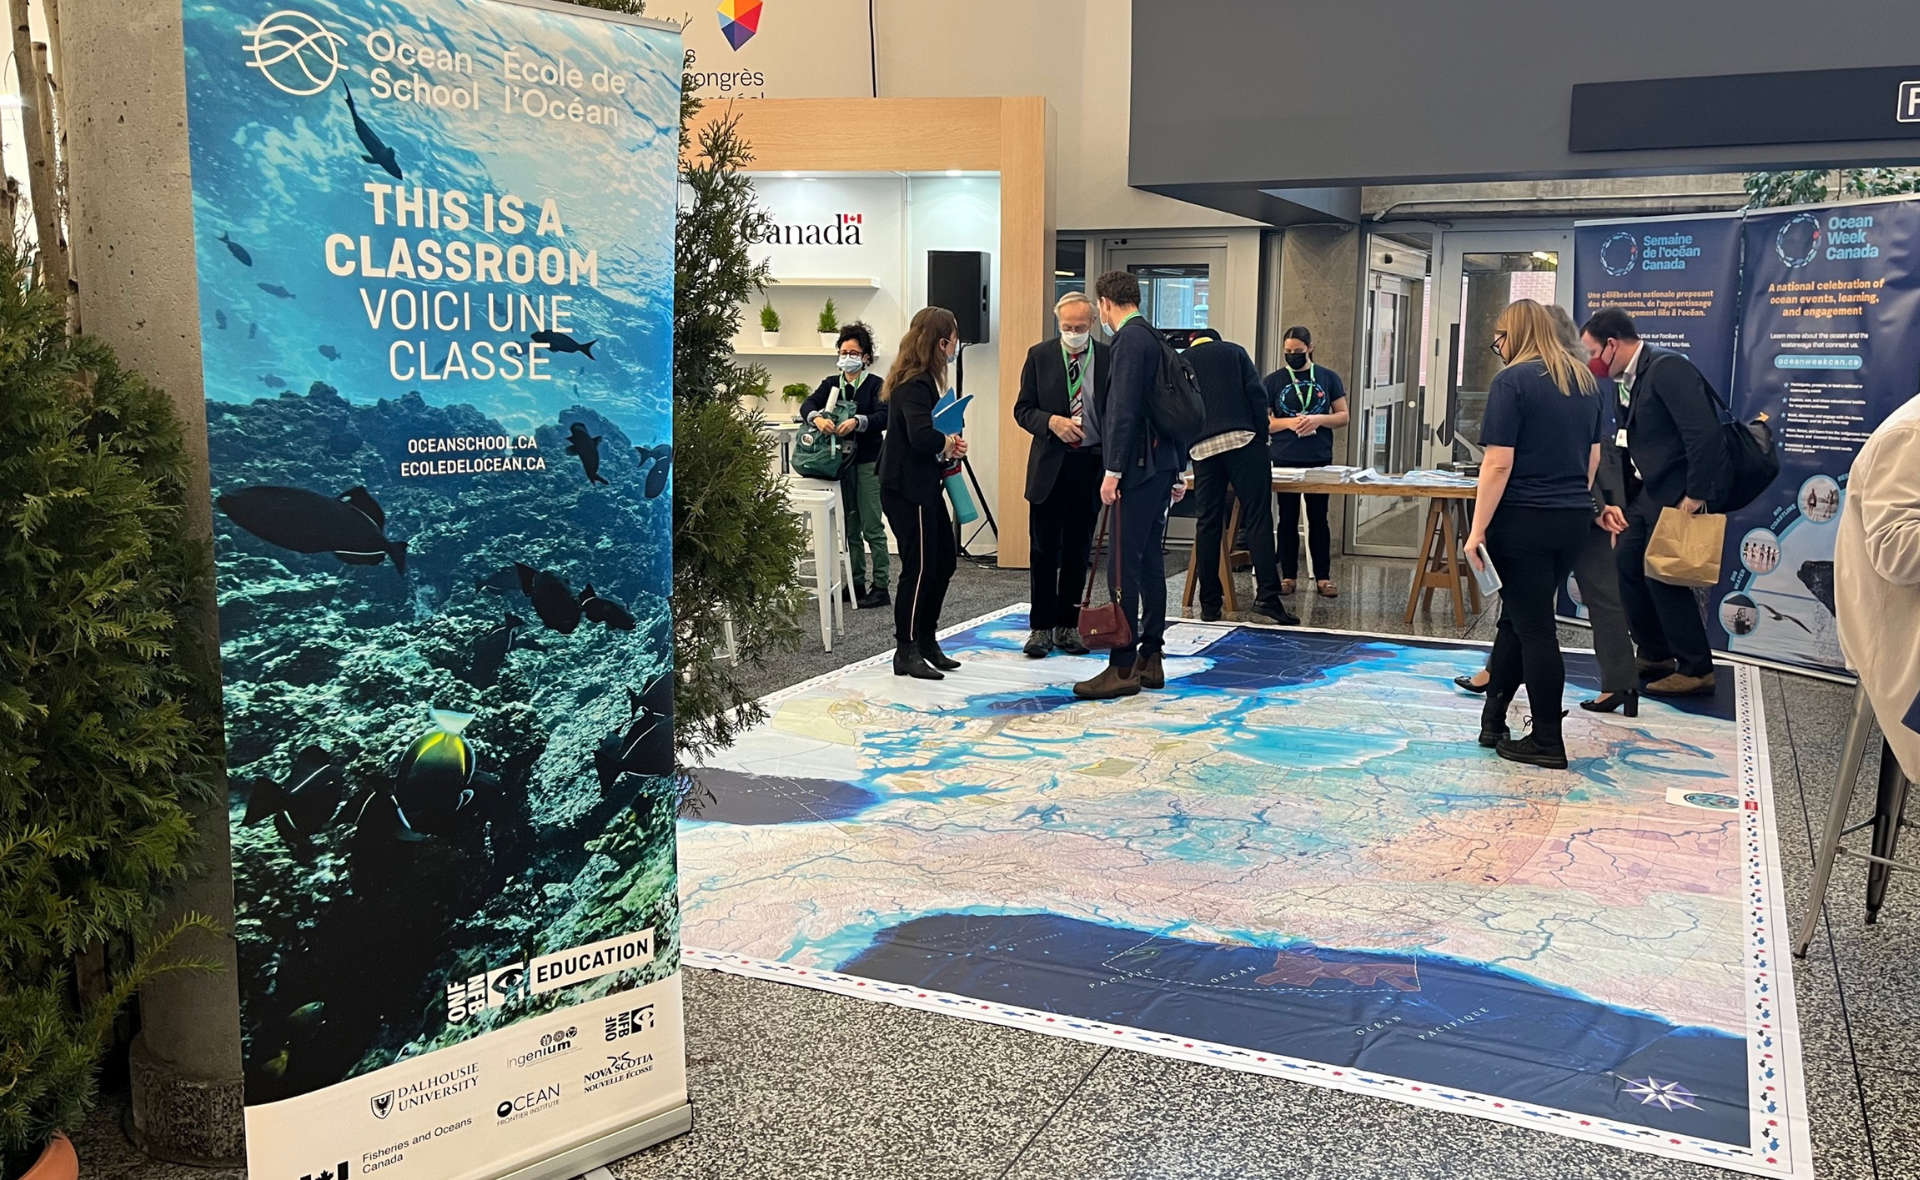 Photo of the Ocean, Freshwater and Us Giant Floor Map showing event at the Canadian Pavillion at COP 15. Attendees look down at the Giant-floor map and try it out. On the left side of the photo, there's an Ocean School standing banner. The banner features Ocean School logo and its partners' logo and the following text: "This is a classroom".